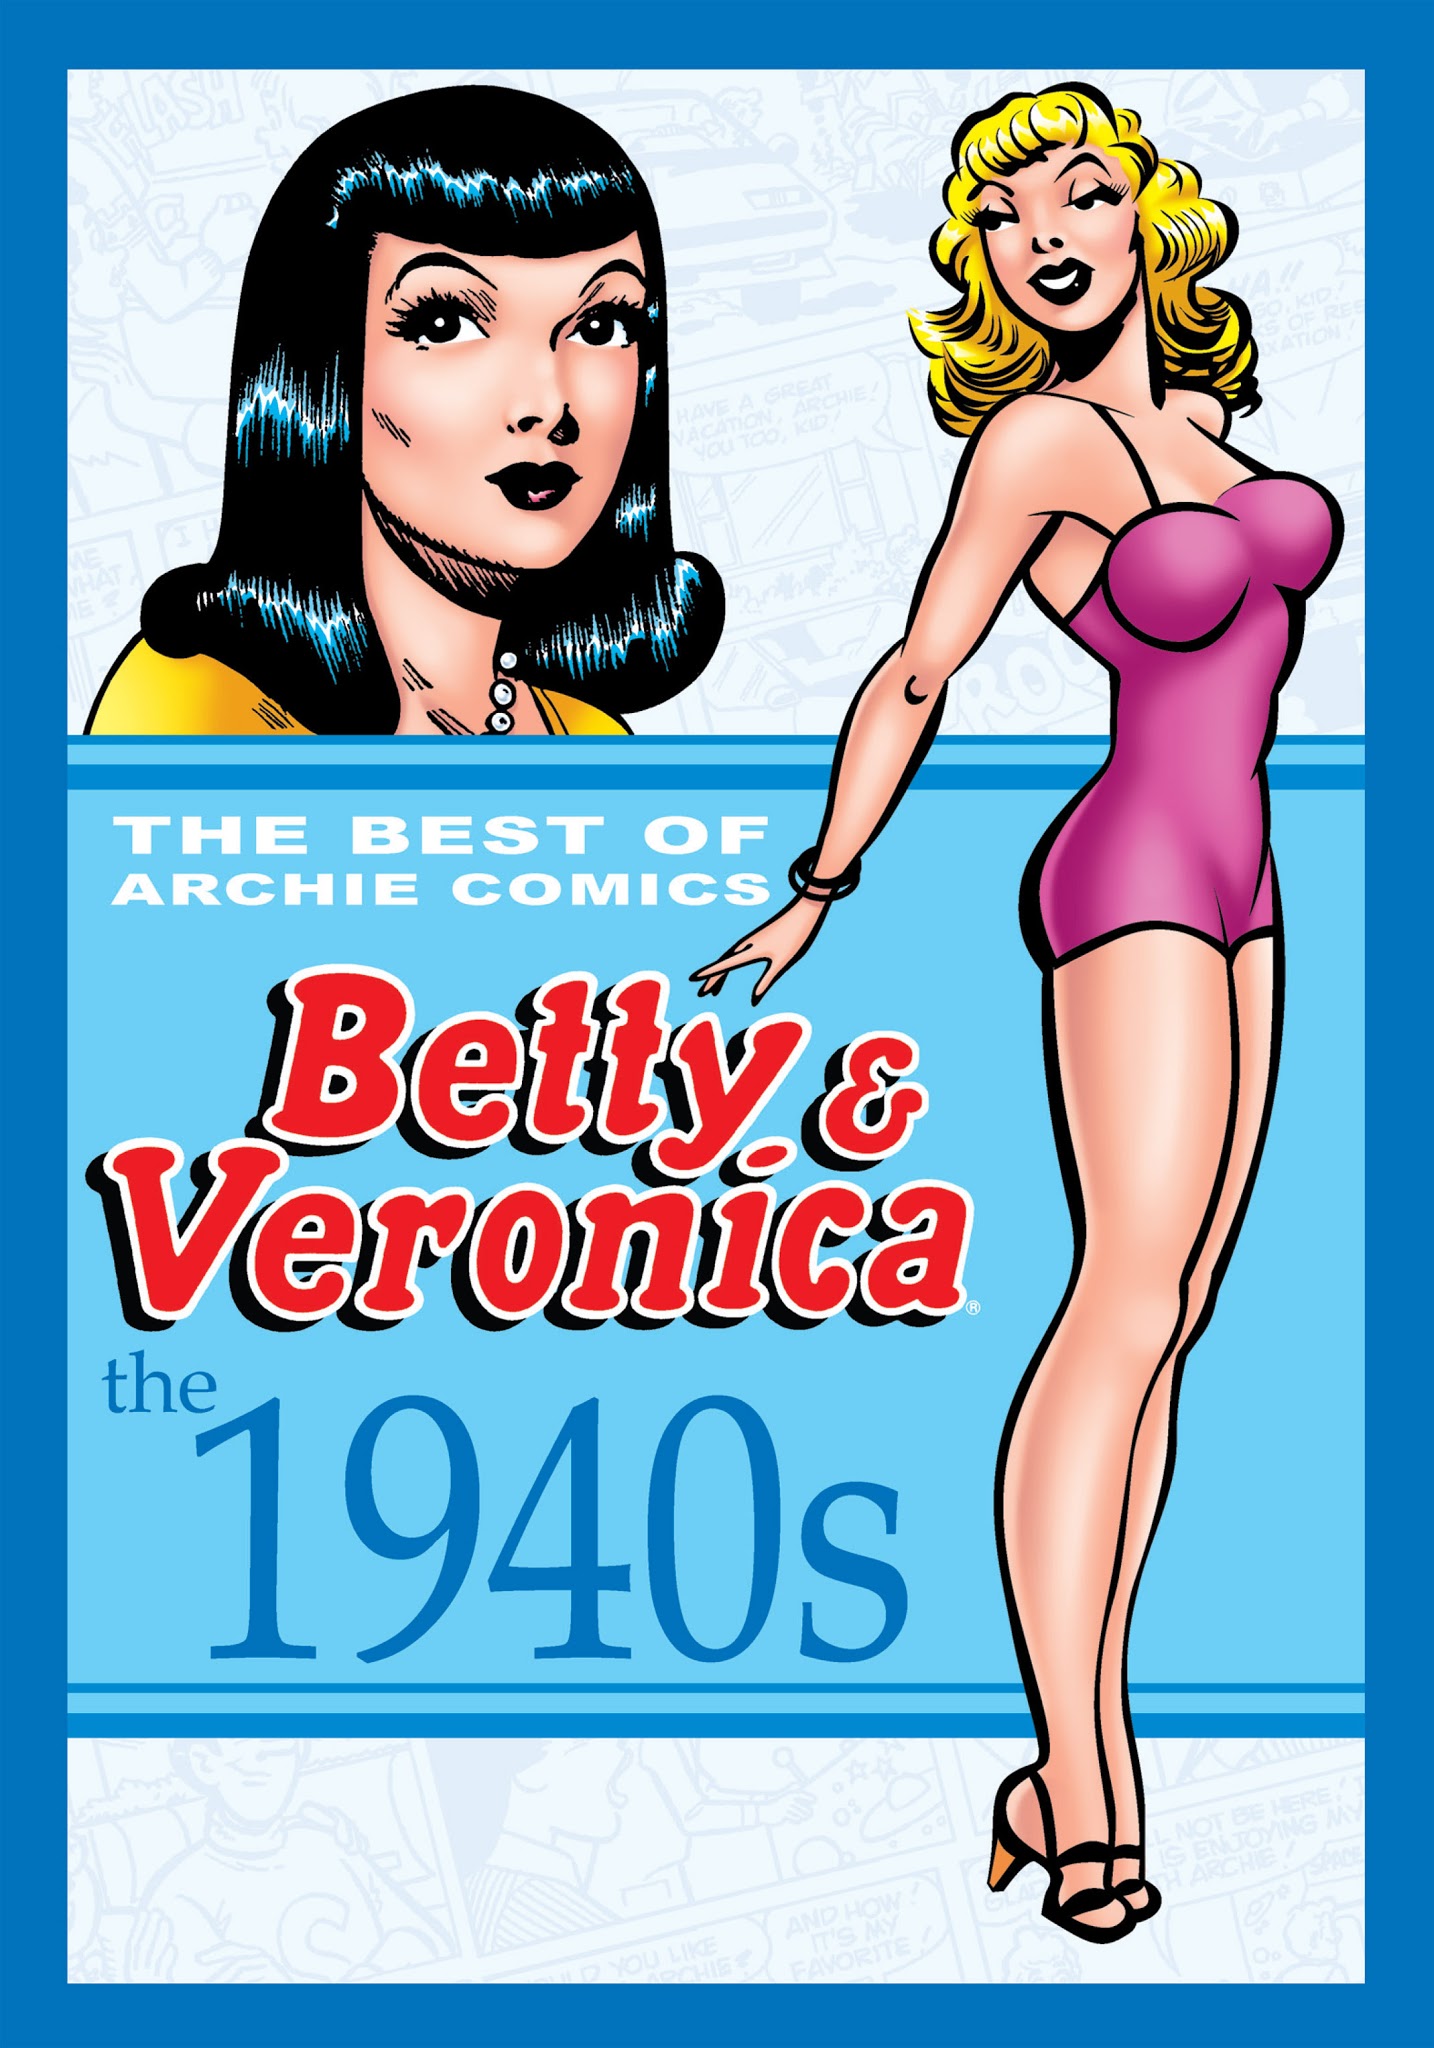 Read online The Best of Archie Comics: Betty & Veronica comic -  Issue # TPB - 6